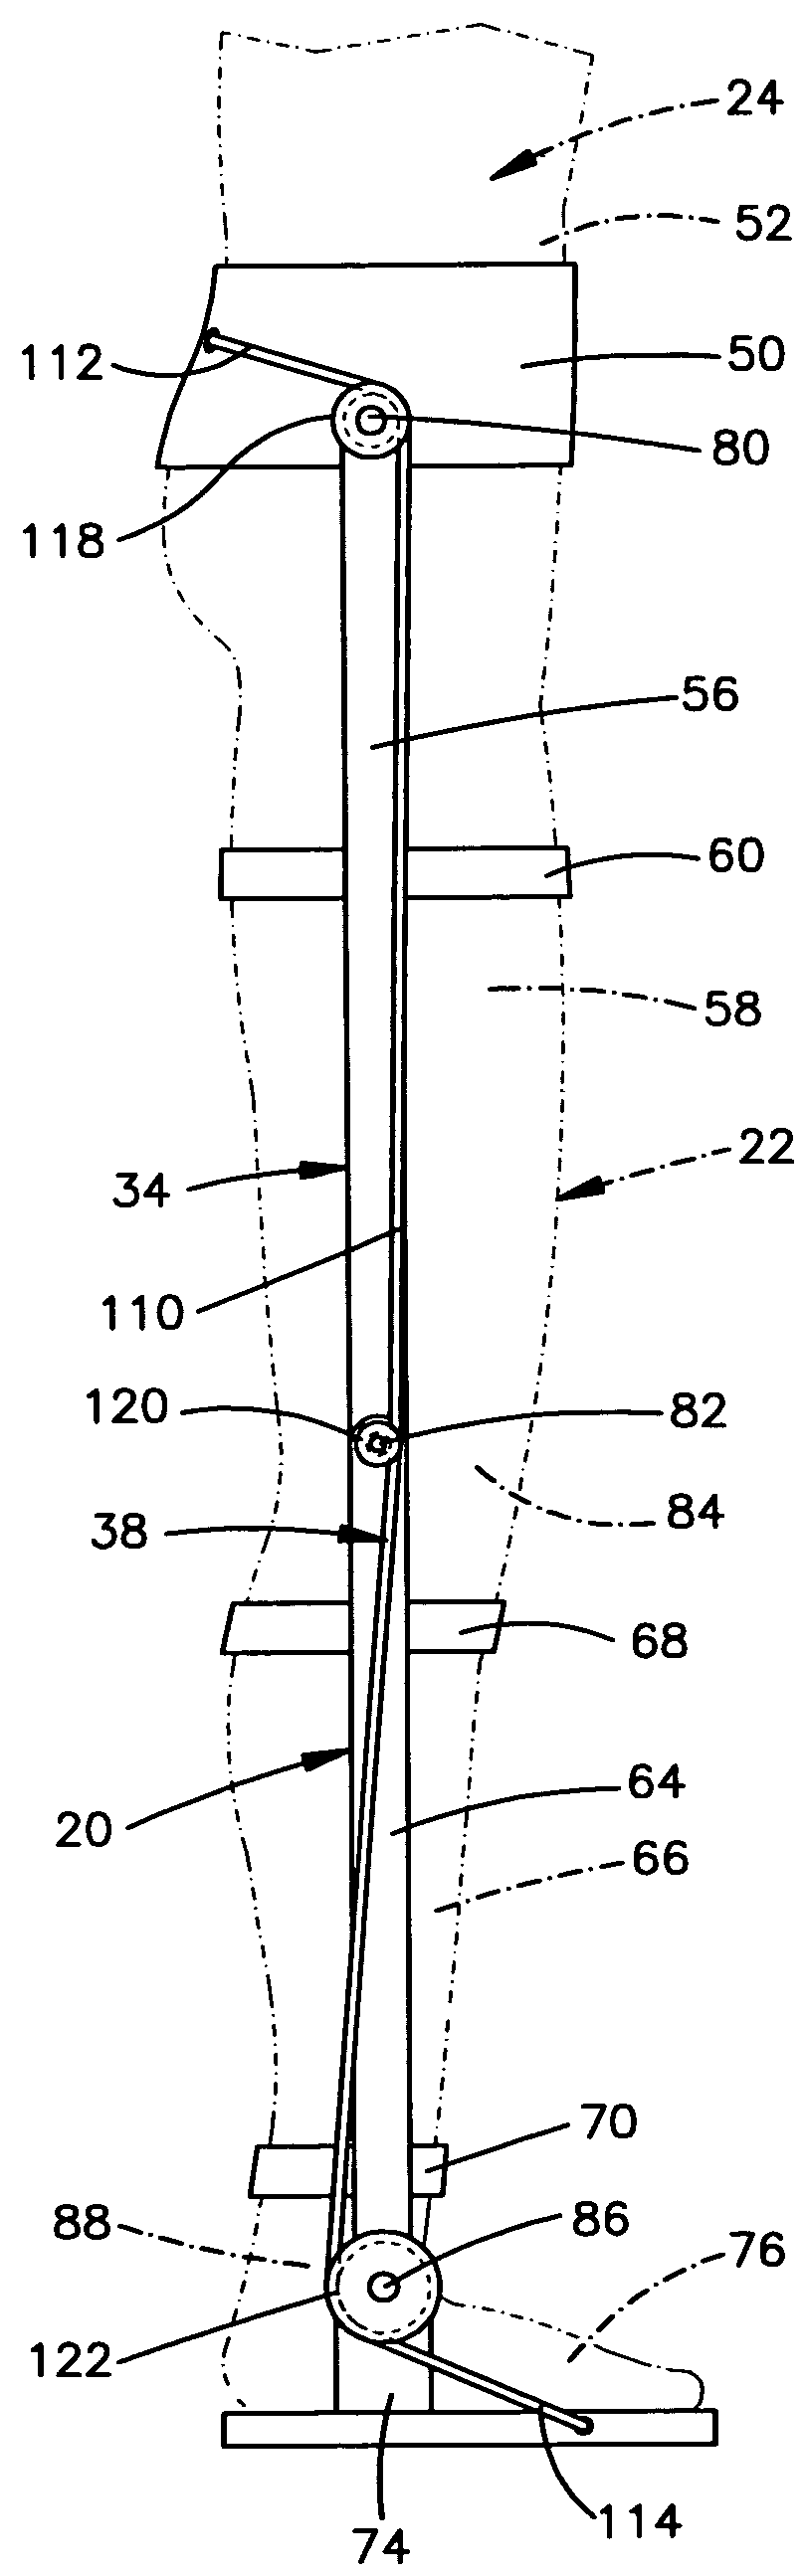 Apparatus for assisting body movement